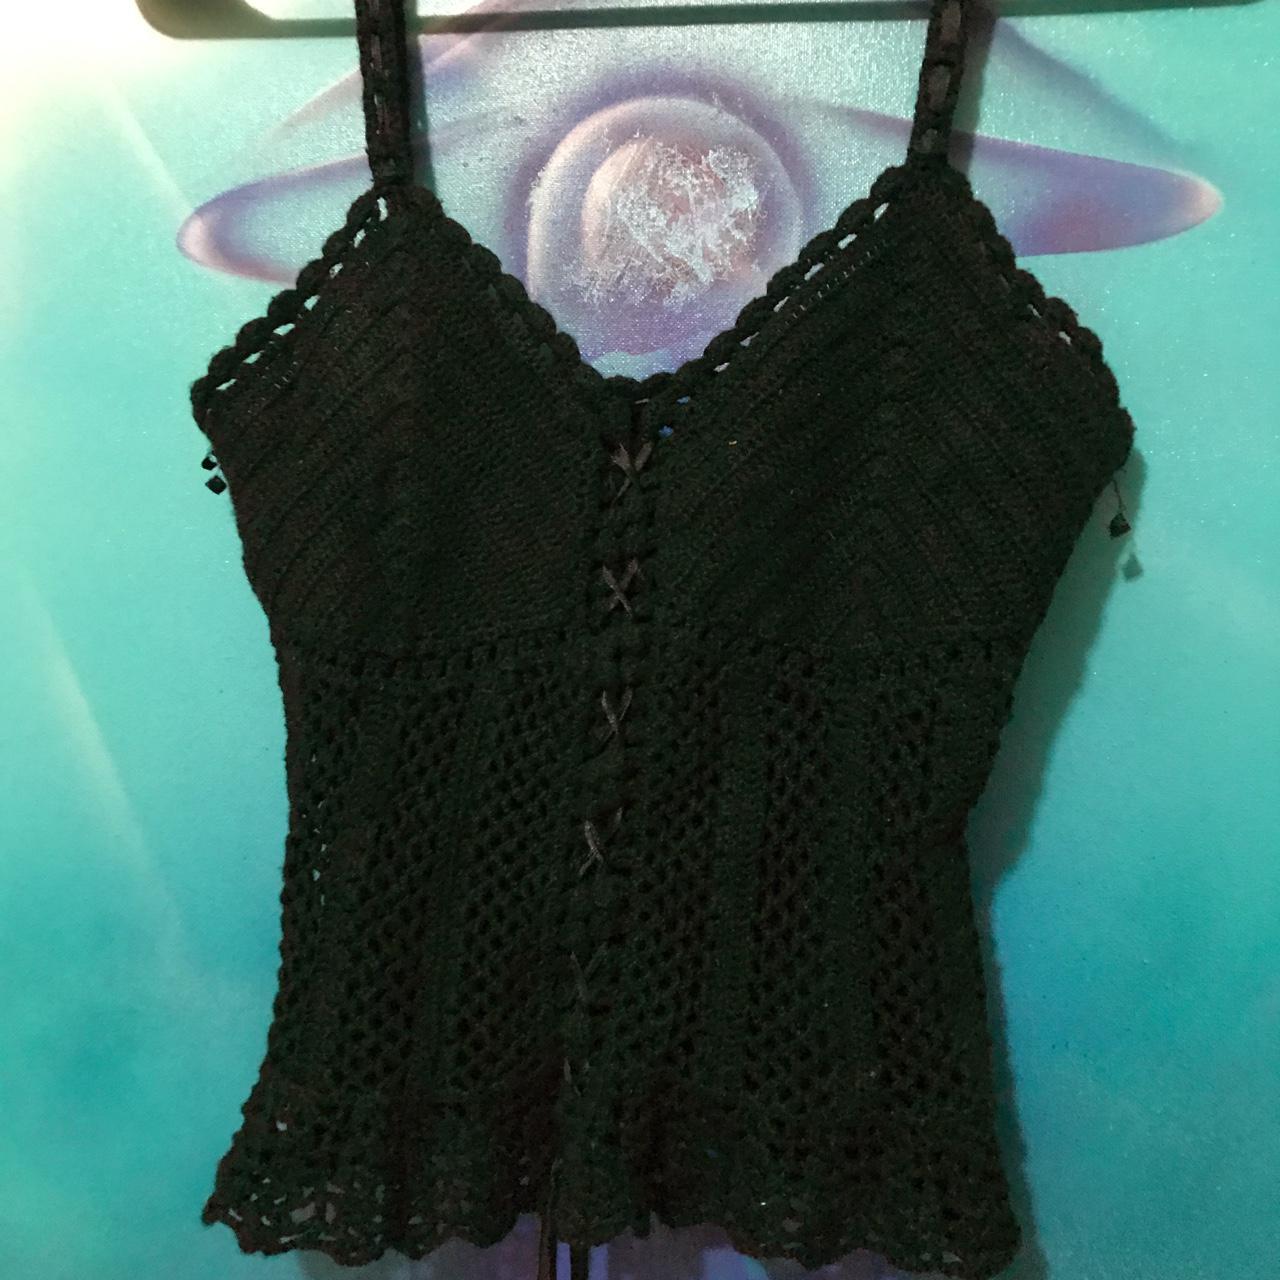 Product Image 1 - Black knit cami top
With laced